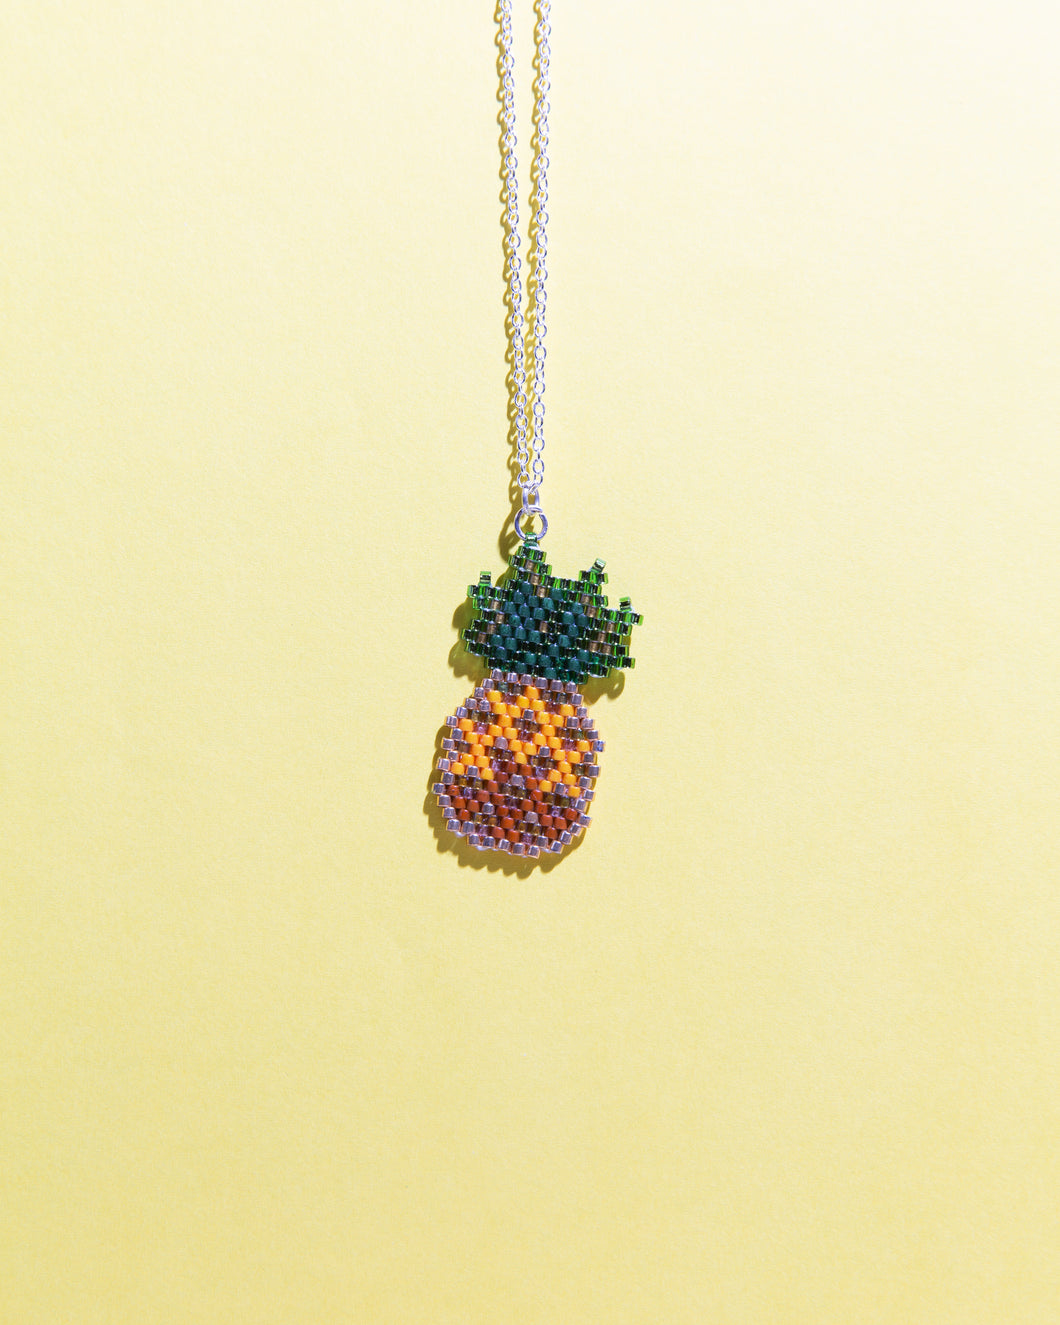 Alicia Wiese, Pineapple Necklace